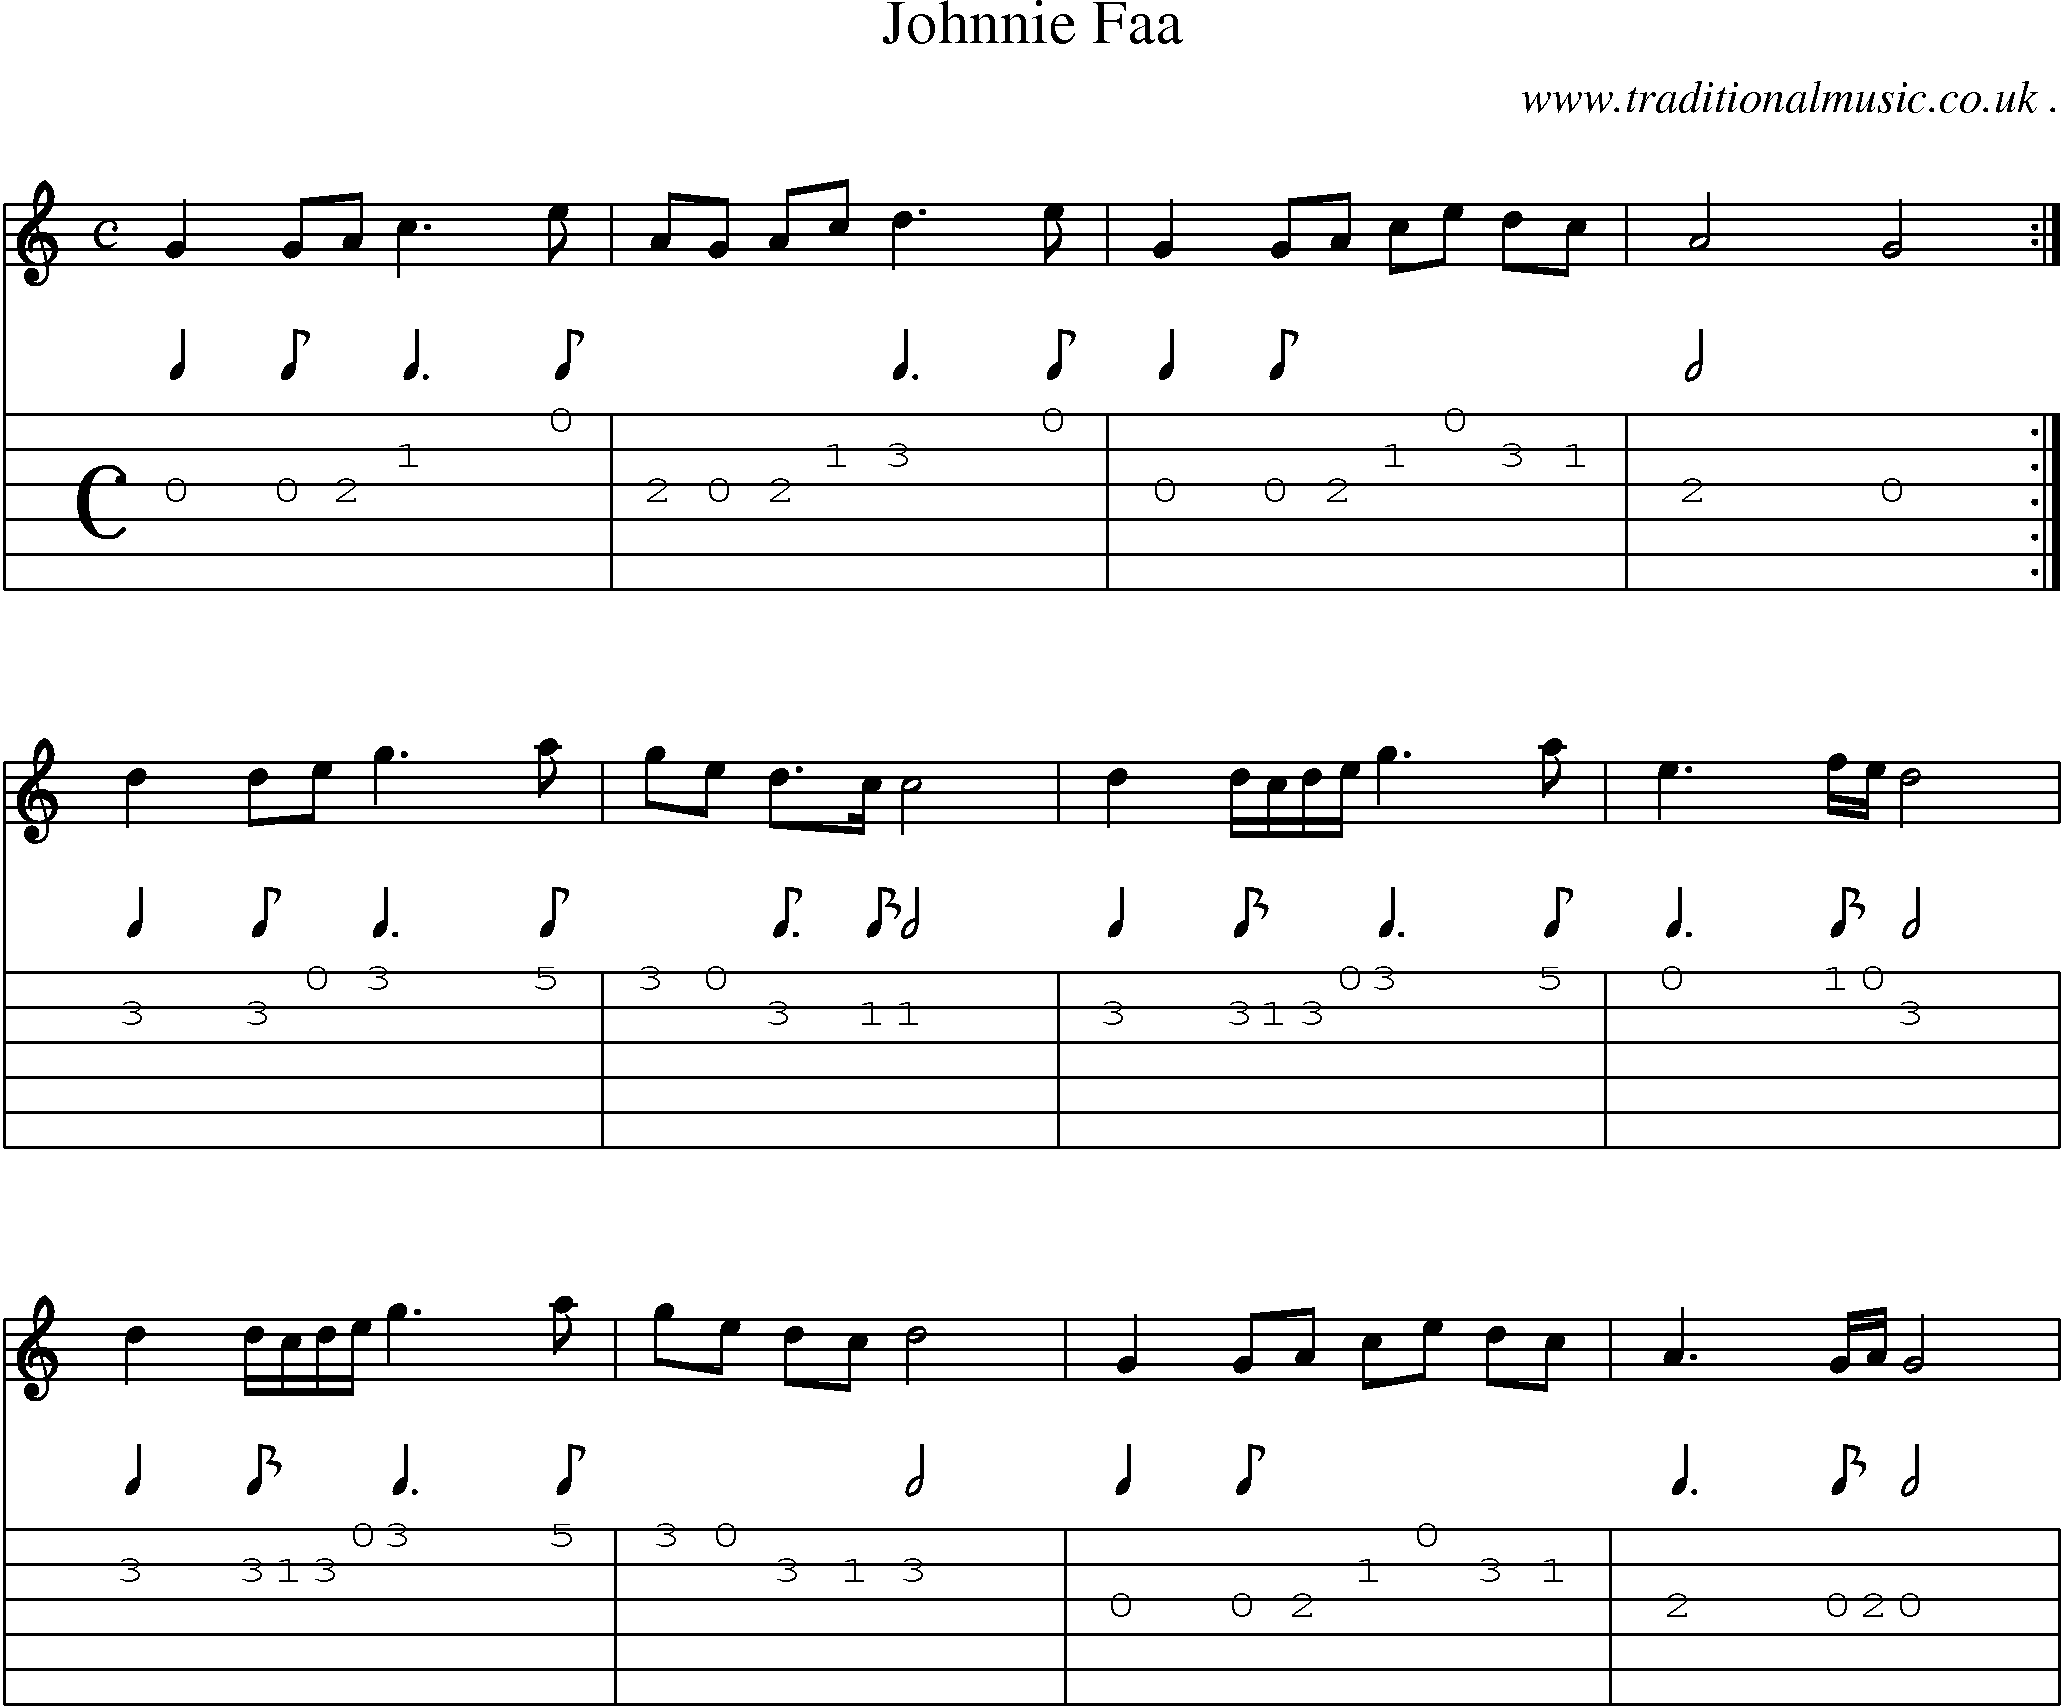 Sheet-Music and Guitar Tabs for Johnnie Faa